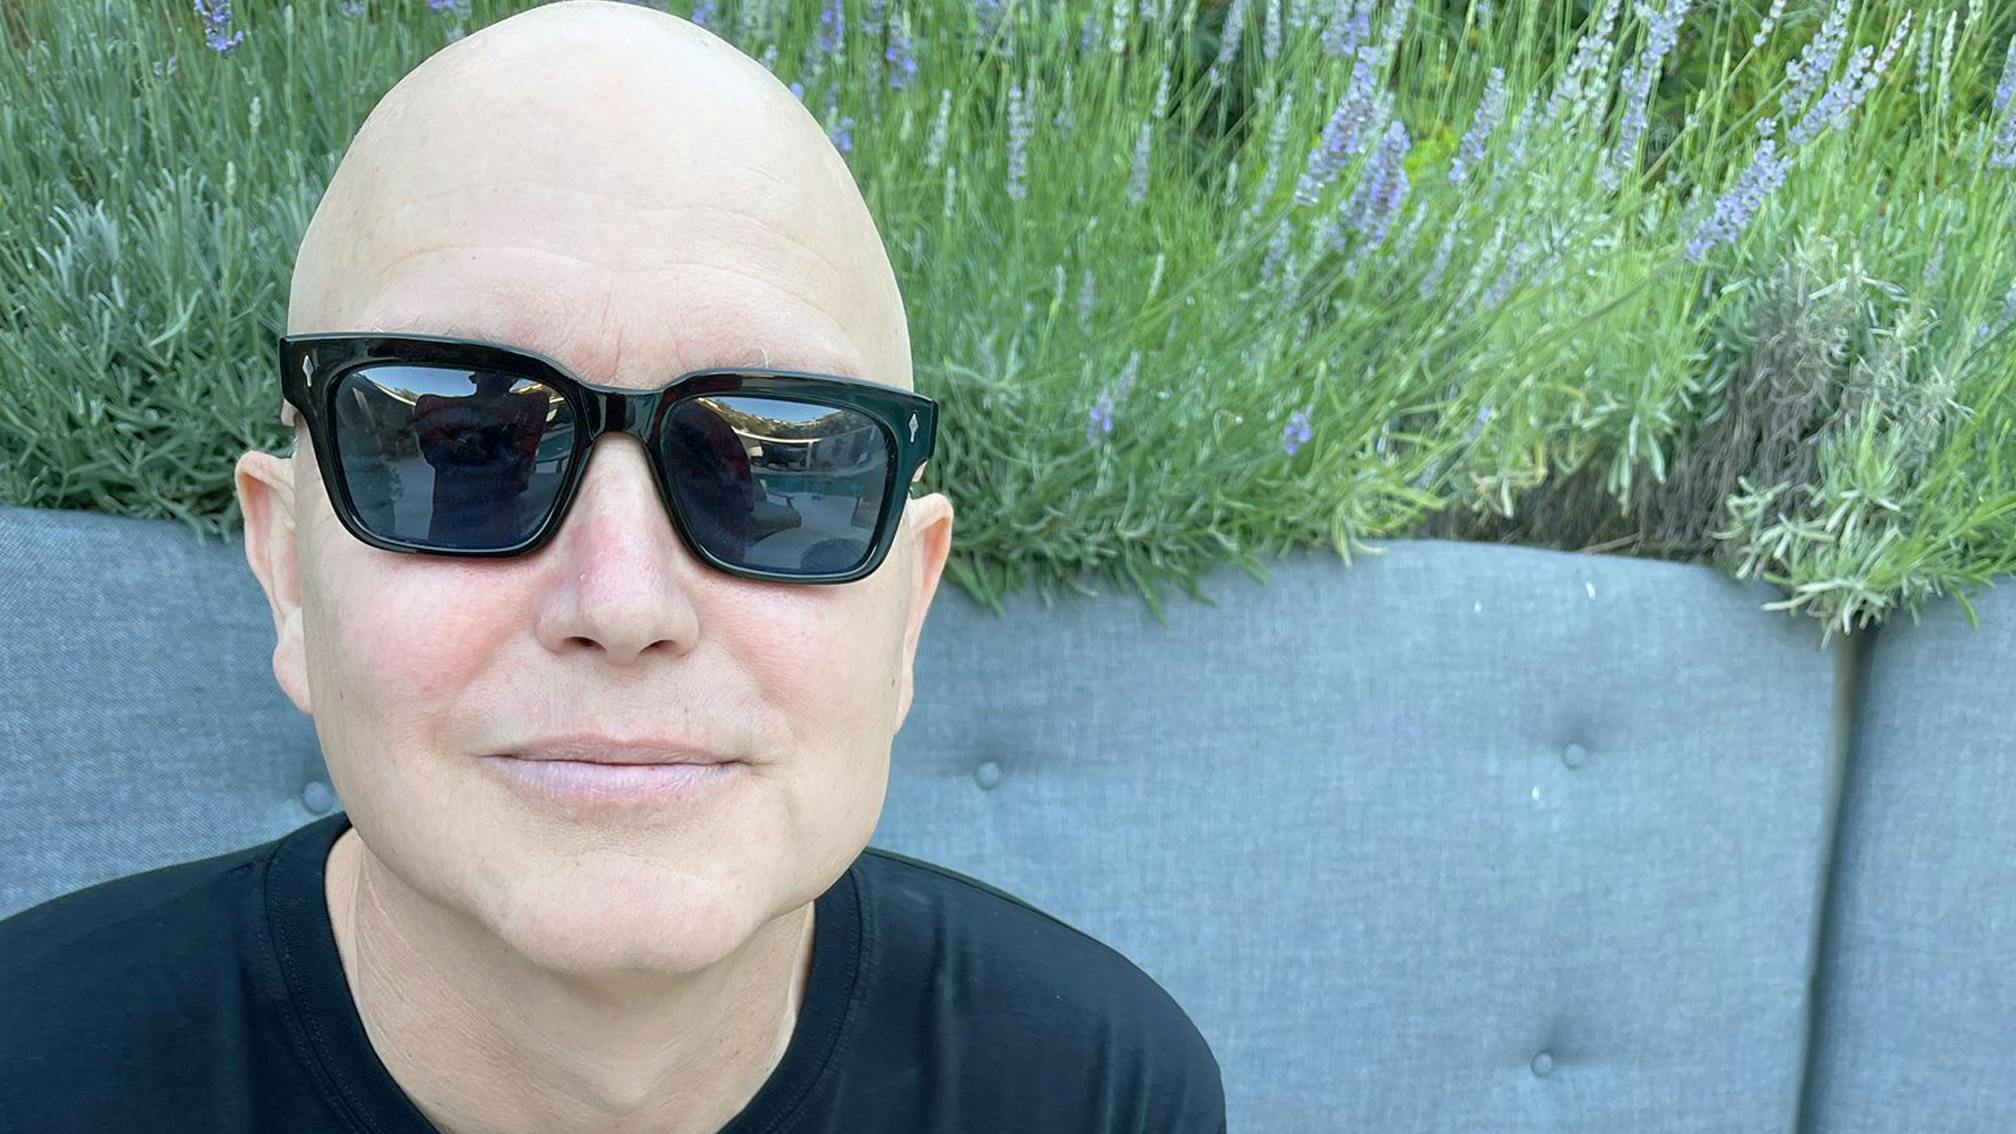 Mark Hoppus details "blood-related" cancer type: "It's entered enough parts of my body that I'm Stage 4"